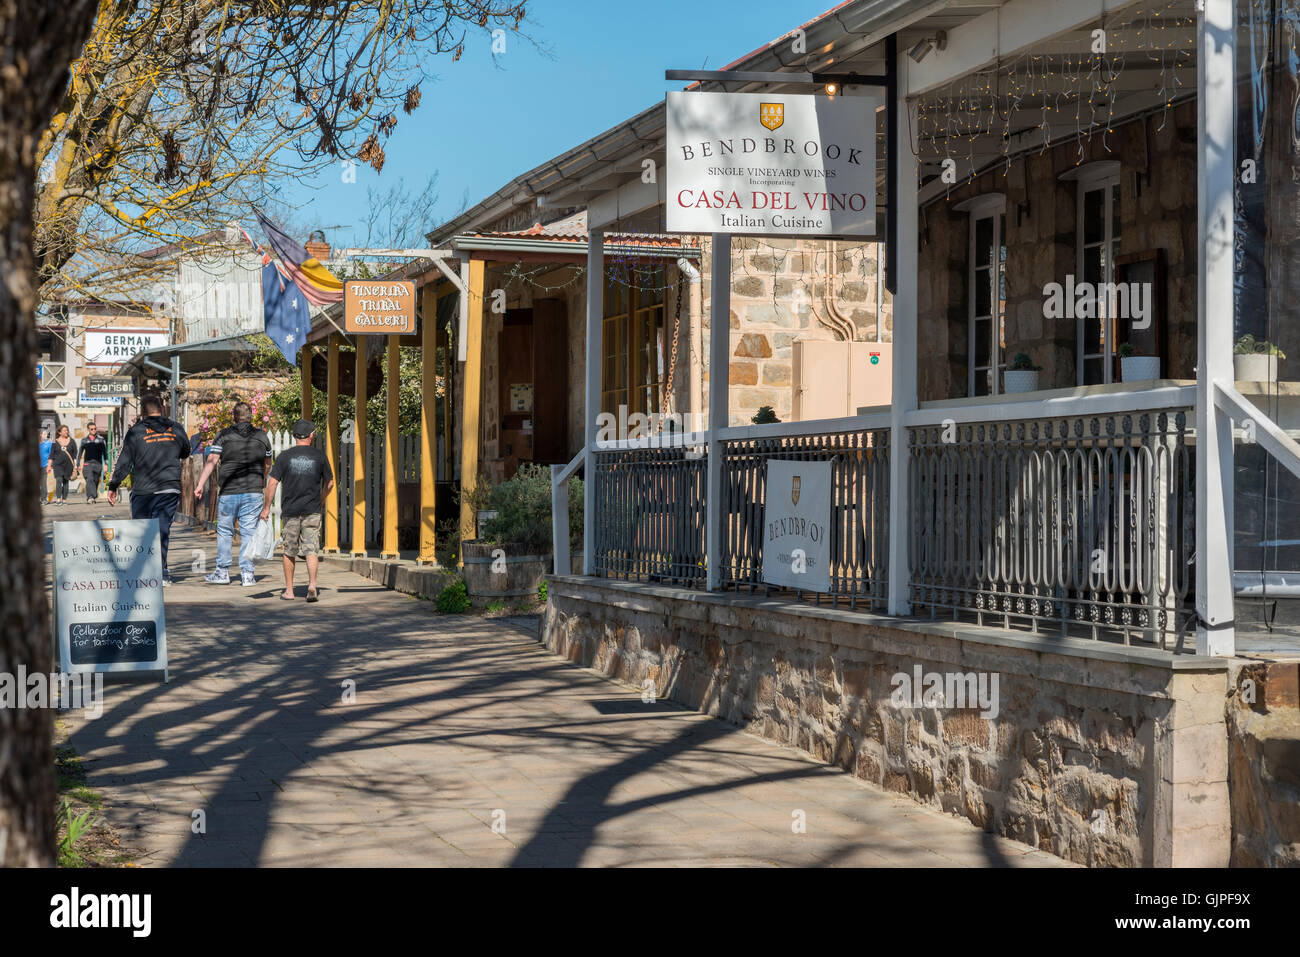 Hahndorf, in South Australia's picturesque Adelaide Hills. Stock Photo